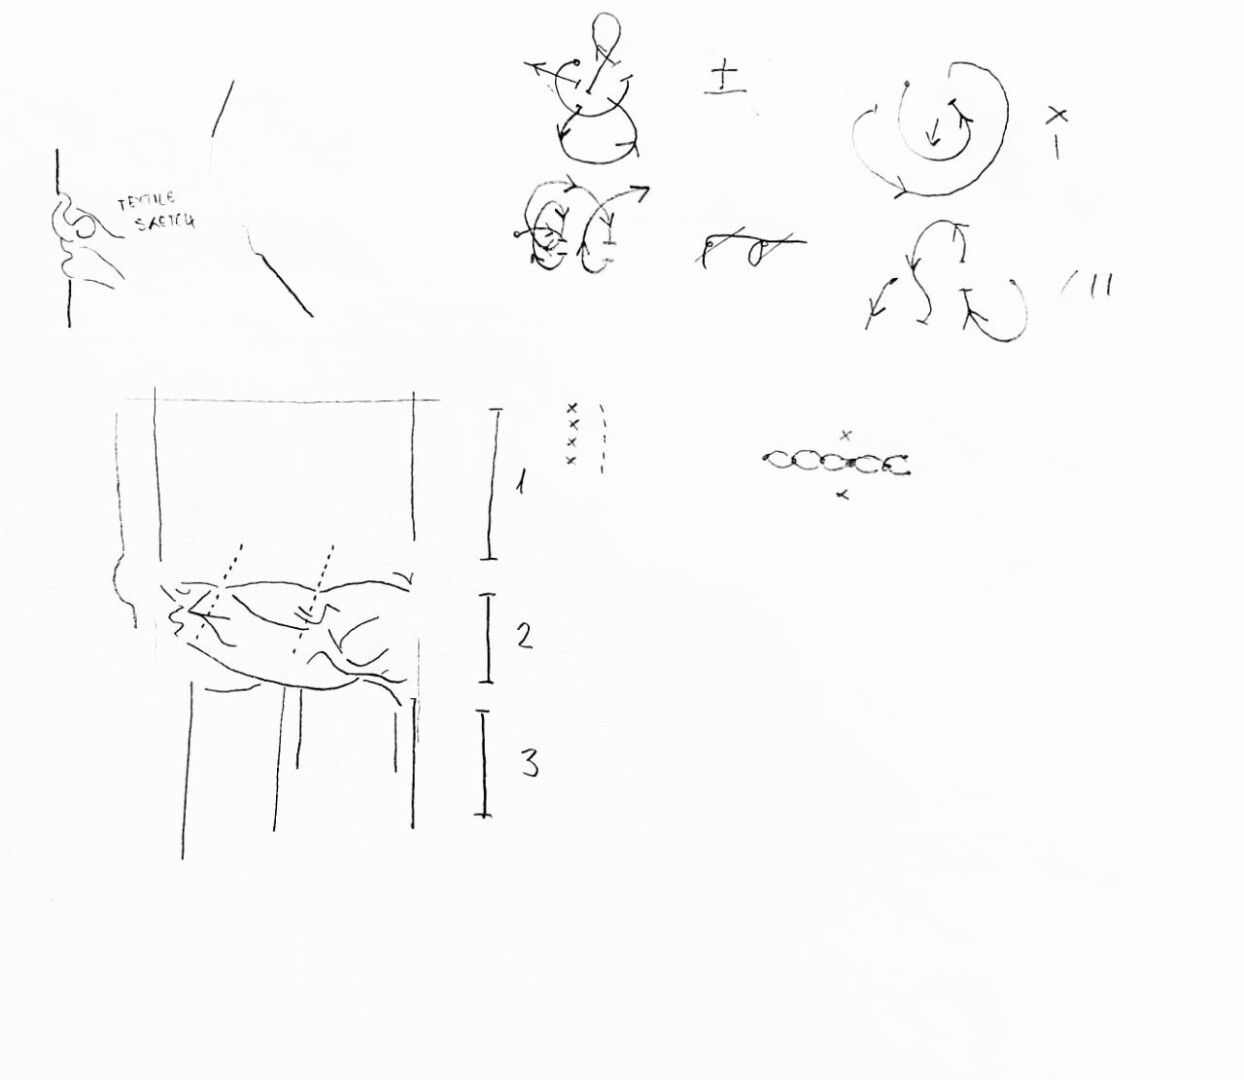 notes and sketches about movement and fabric